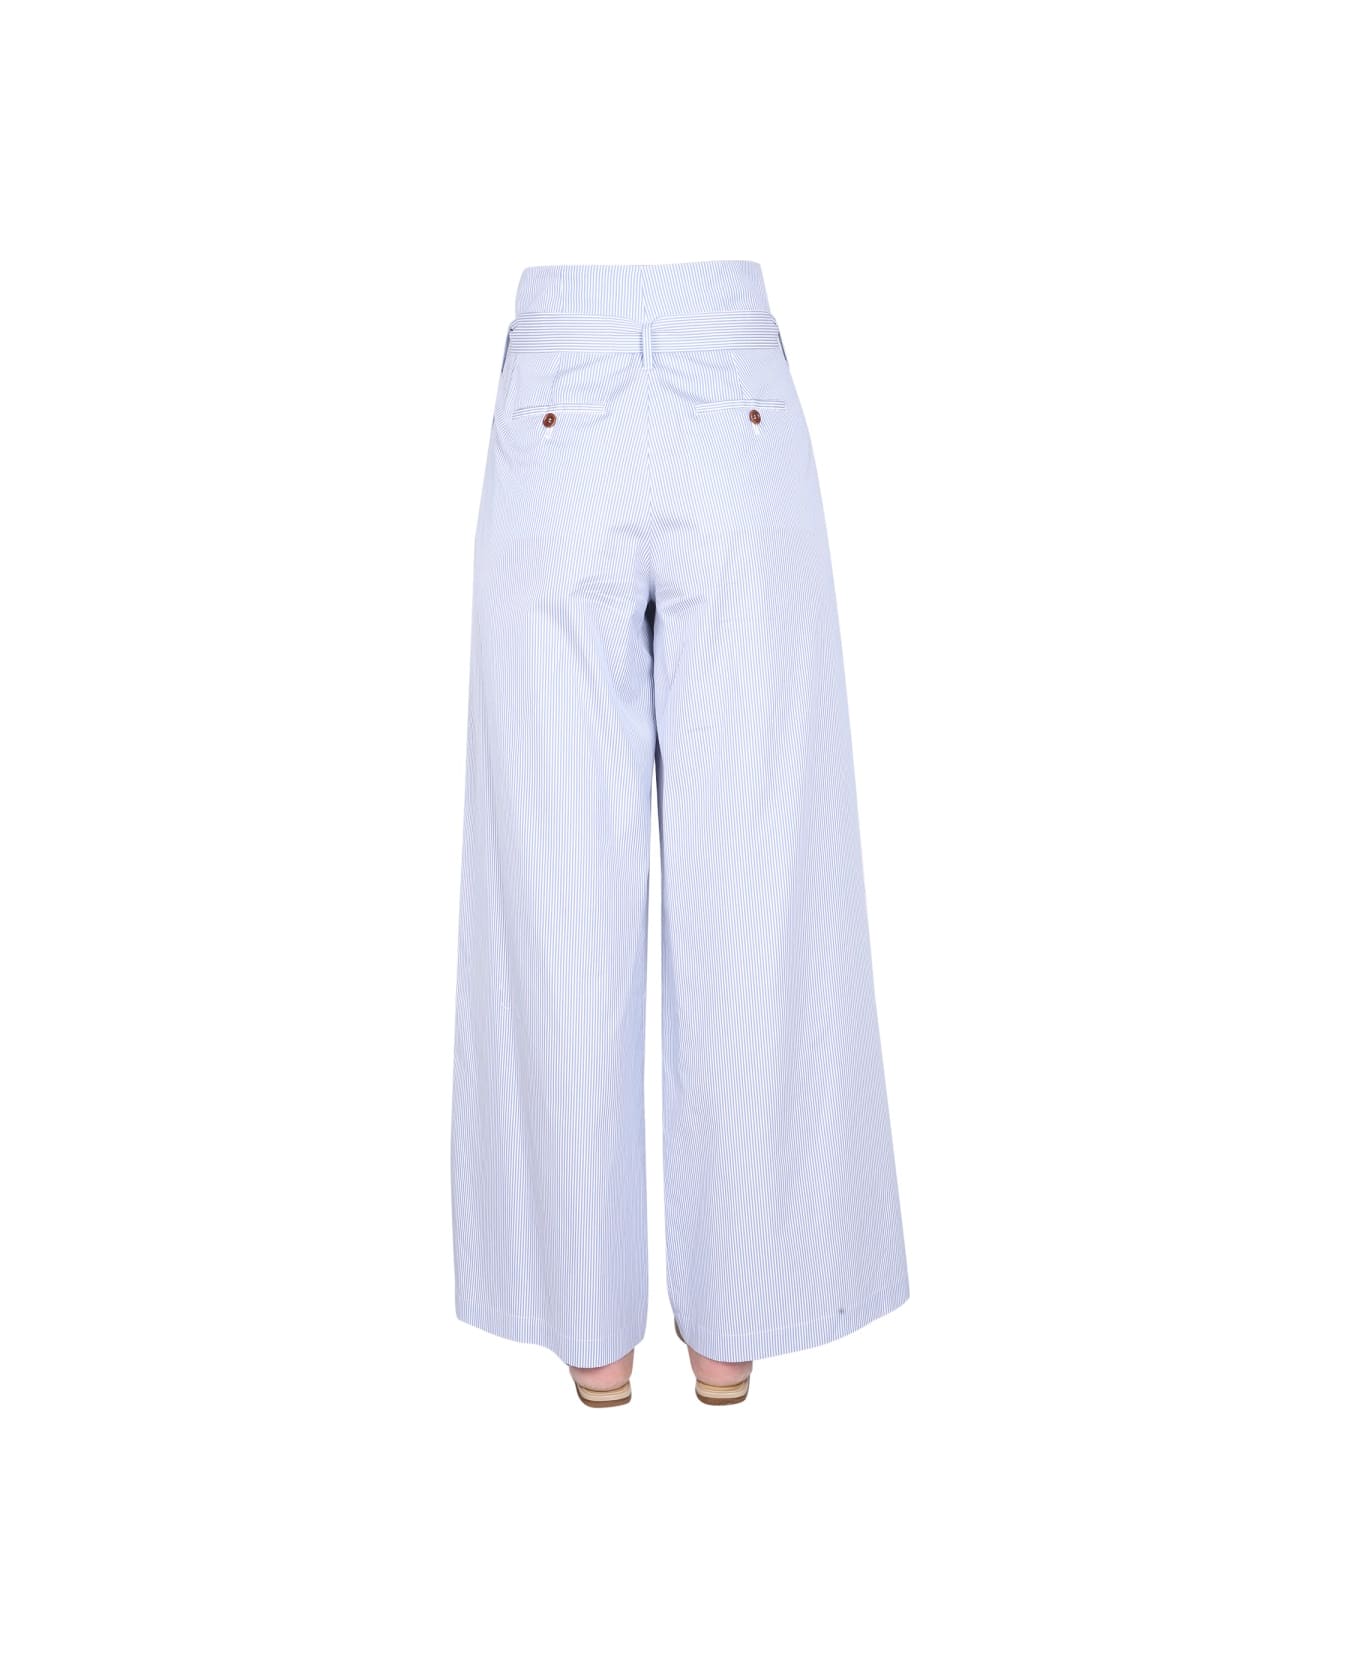 Jejia "sophie" Trousers - AZURE ボトムス